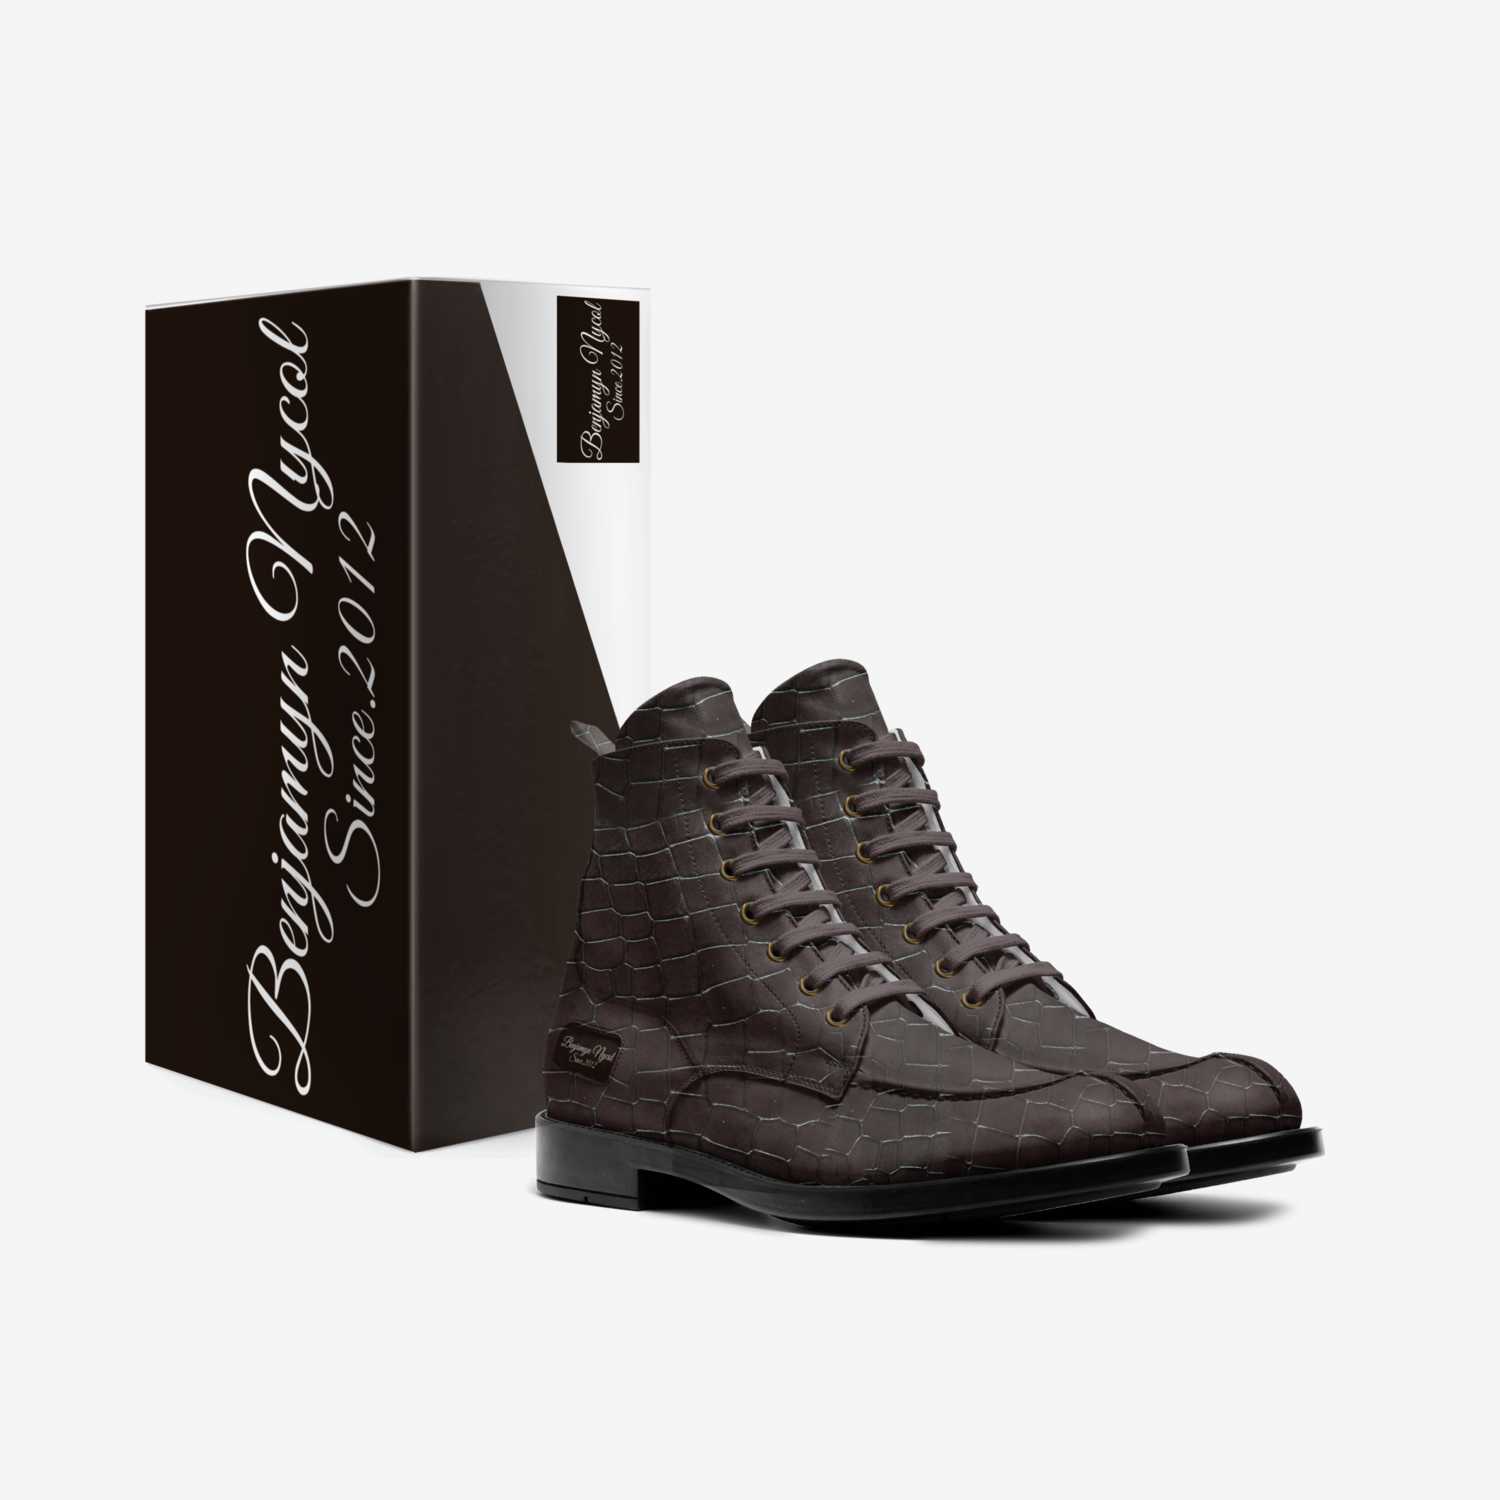 benjamyn nycol custom made in Italy shoes by Nicol Walker | Box view